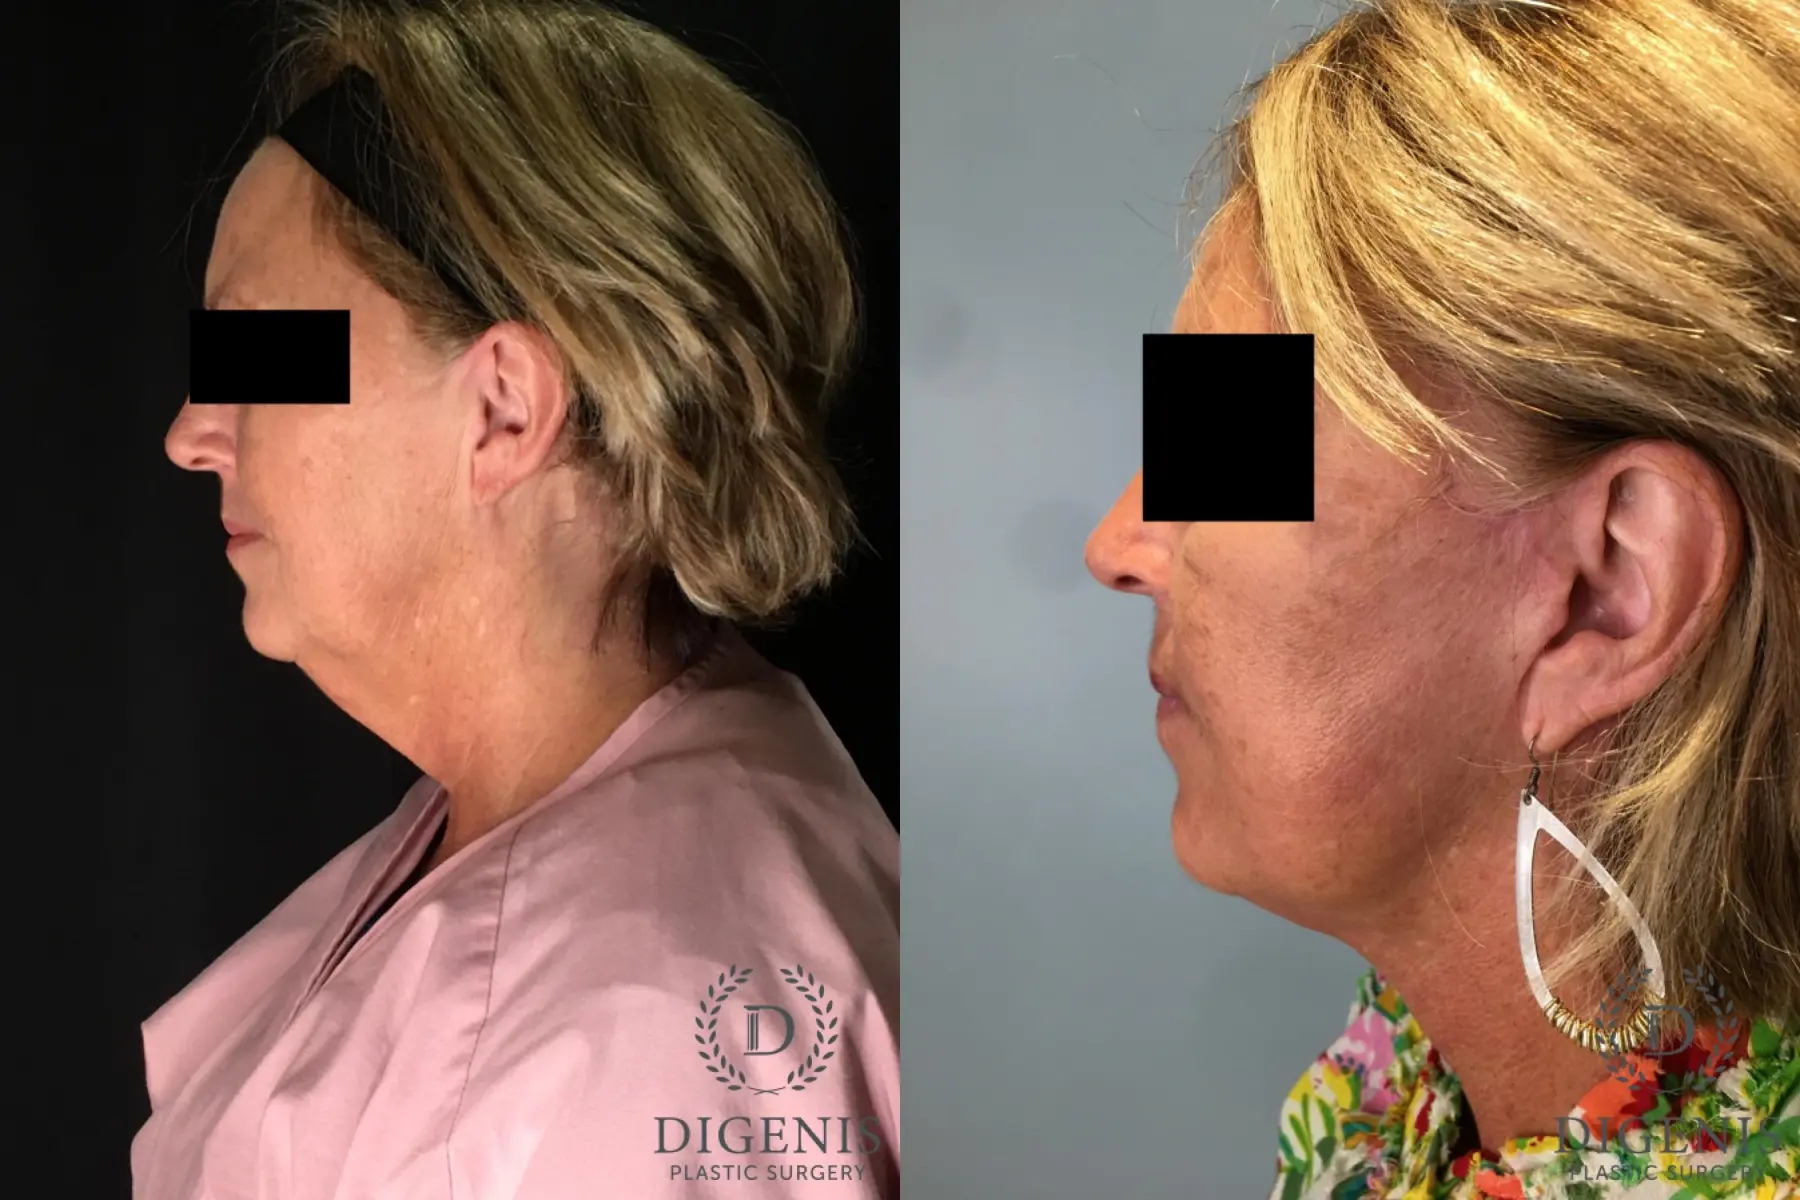 Facelift: Patient 27 - Before and After 5